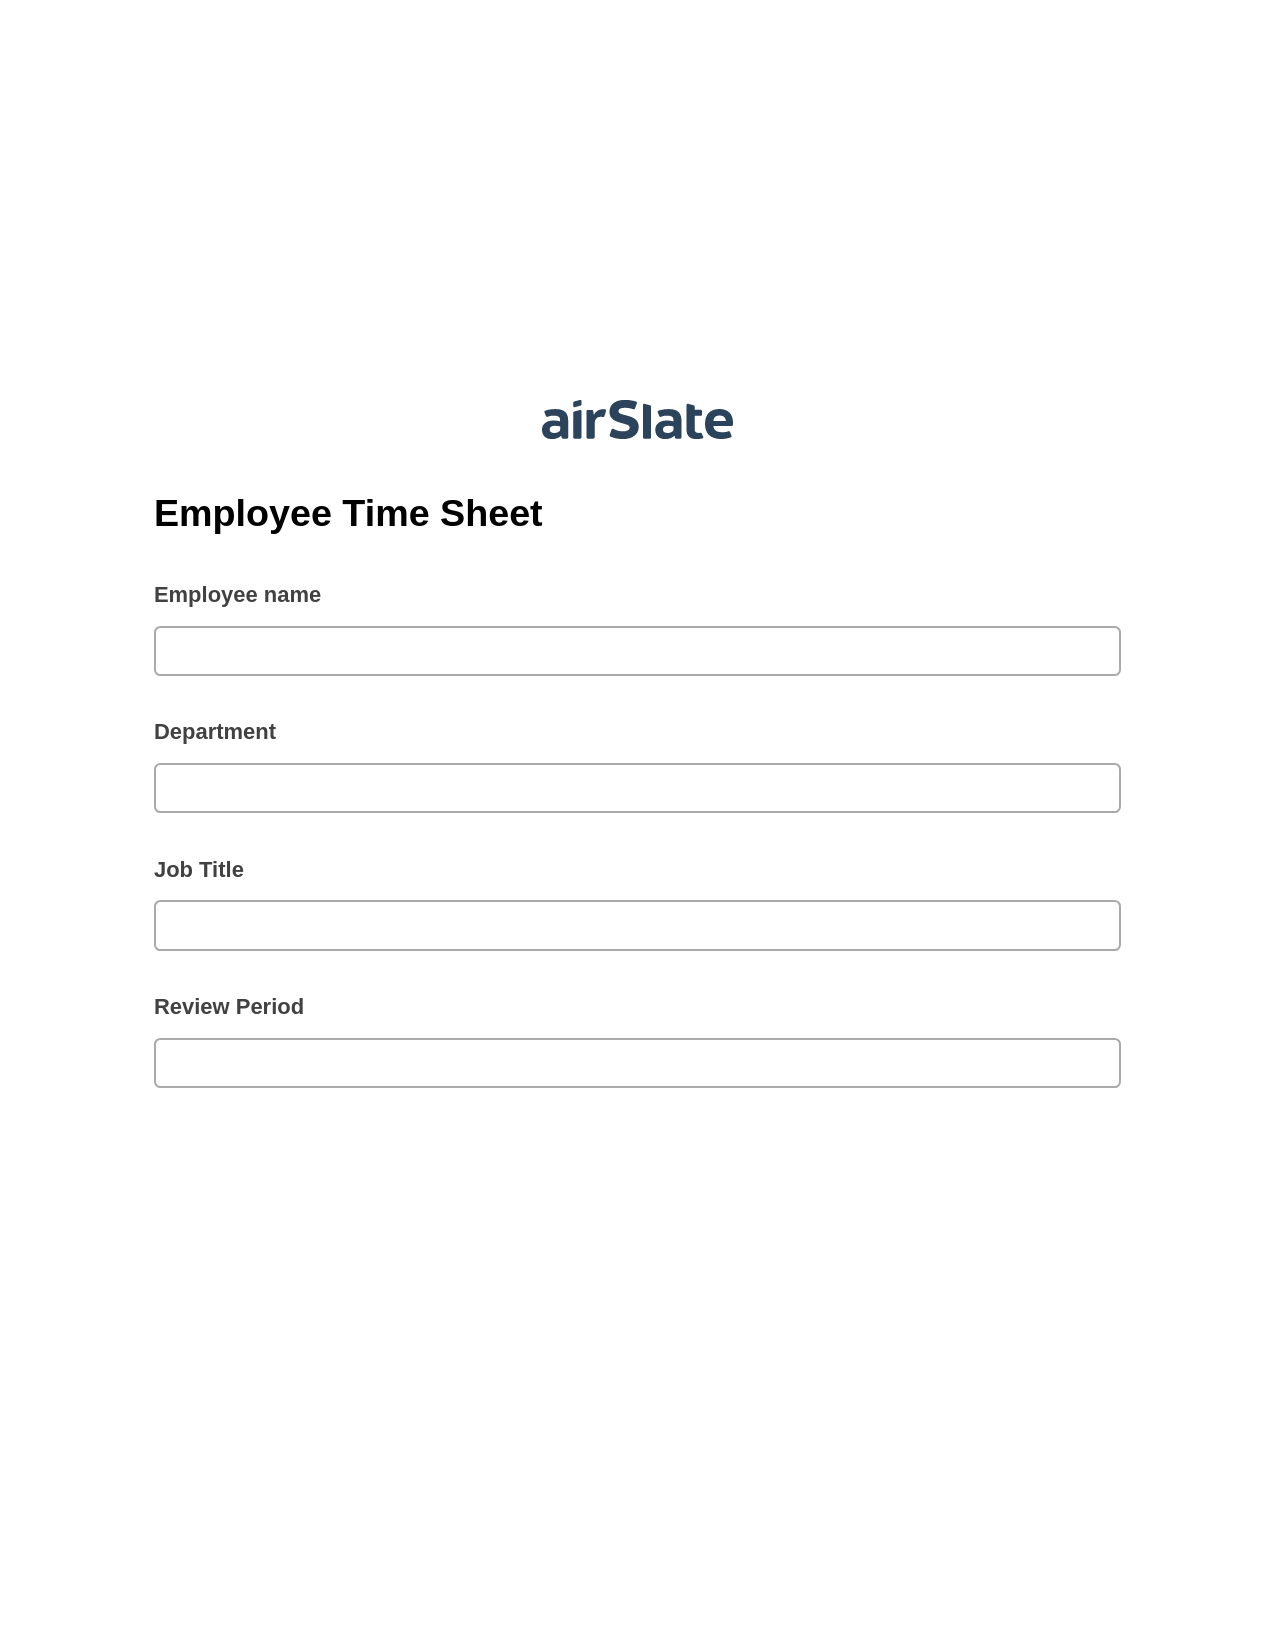 Employee Time Sheet Pre-fill from MS Dynamics 365 Records, Invoke Salesforce Process Bot, Export to Google Sheet Bot